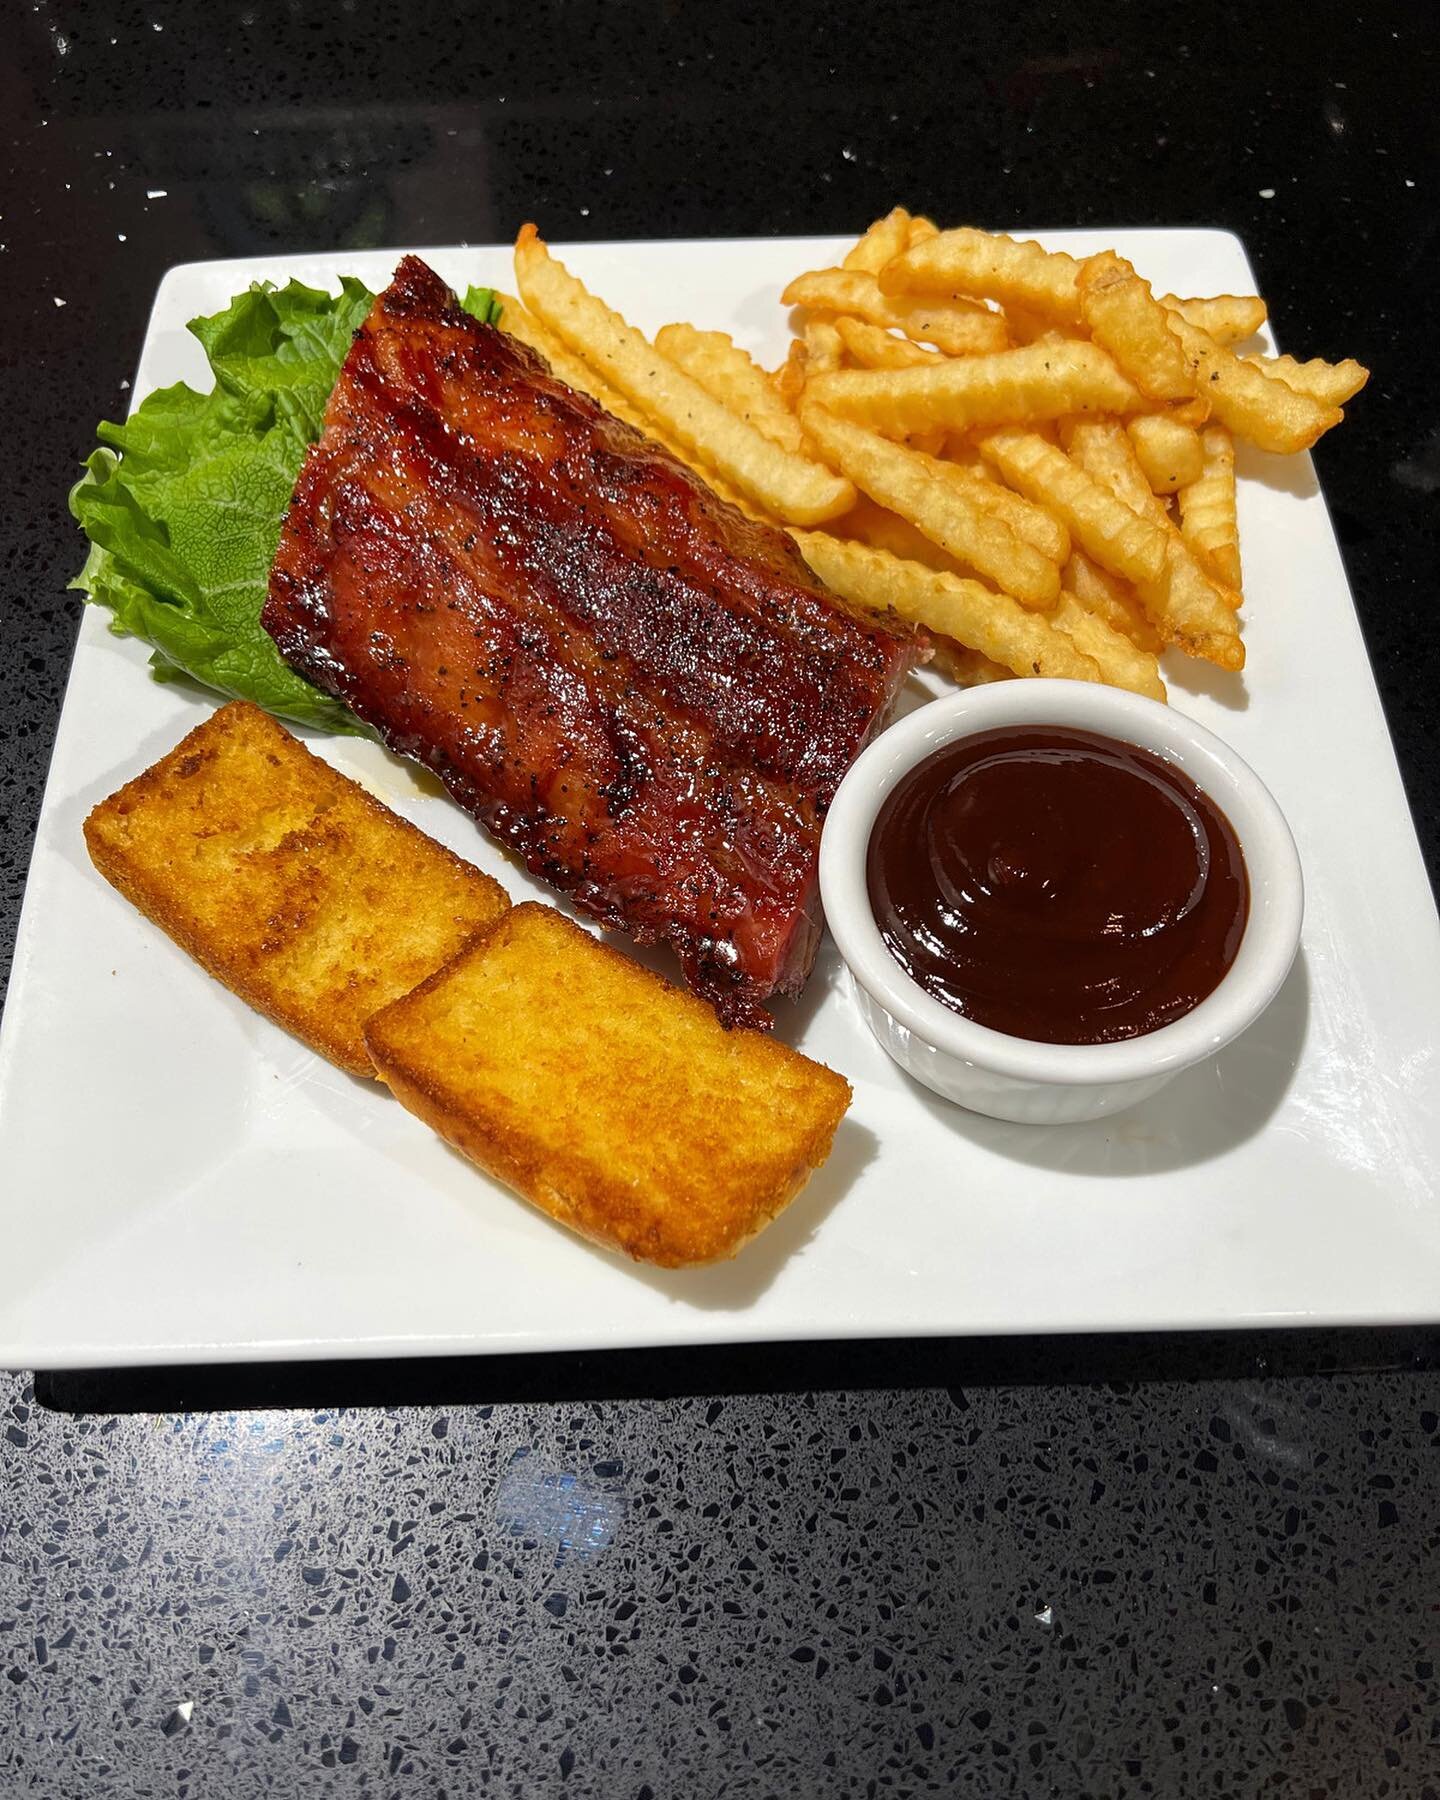 Food Specials are back! This week we&rsquo;ve got our DELICIOUS house smoked Ribs. Get a half rack for $15 or a full rack for $22. Both come with slaw, corn bread, and one side. Come down to Kingpin Social this week and try some of the best ribs in t